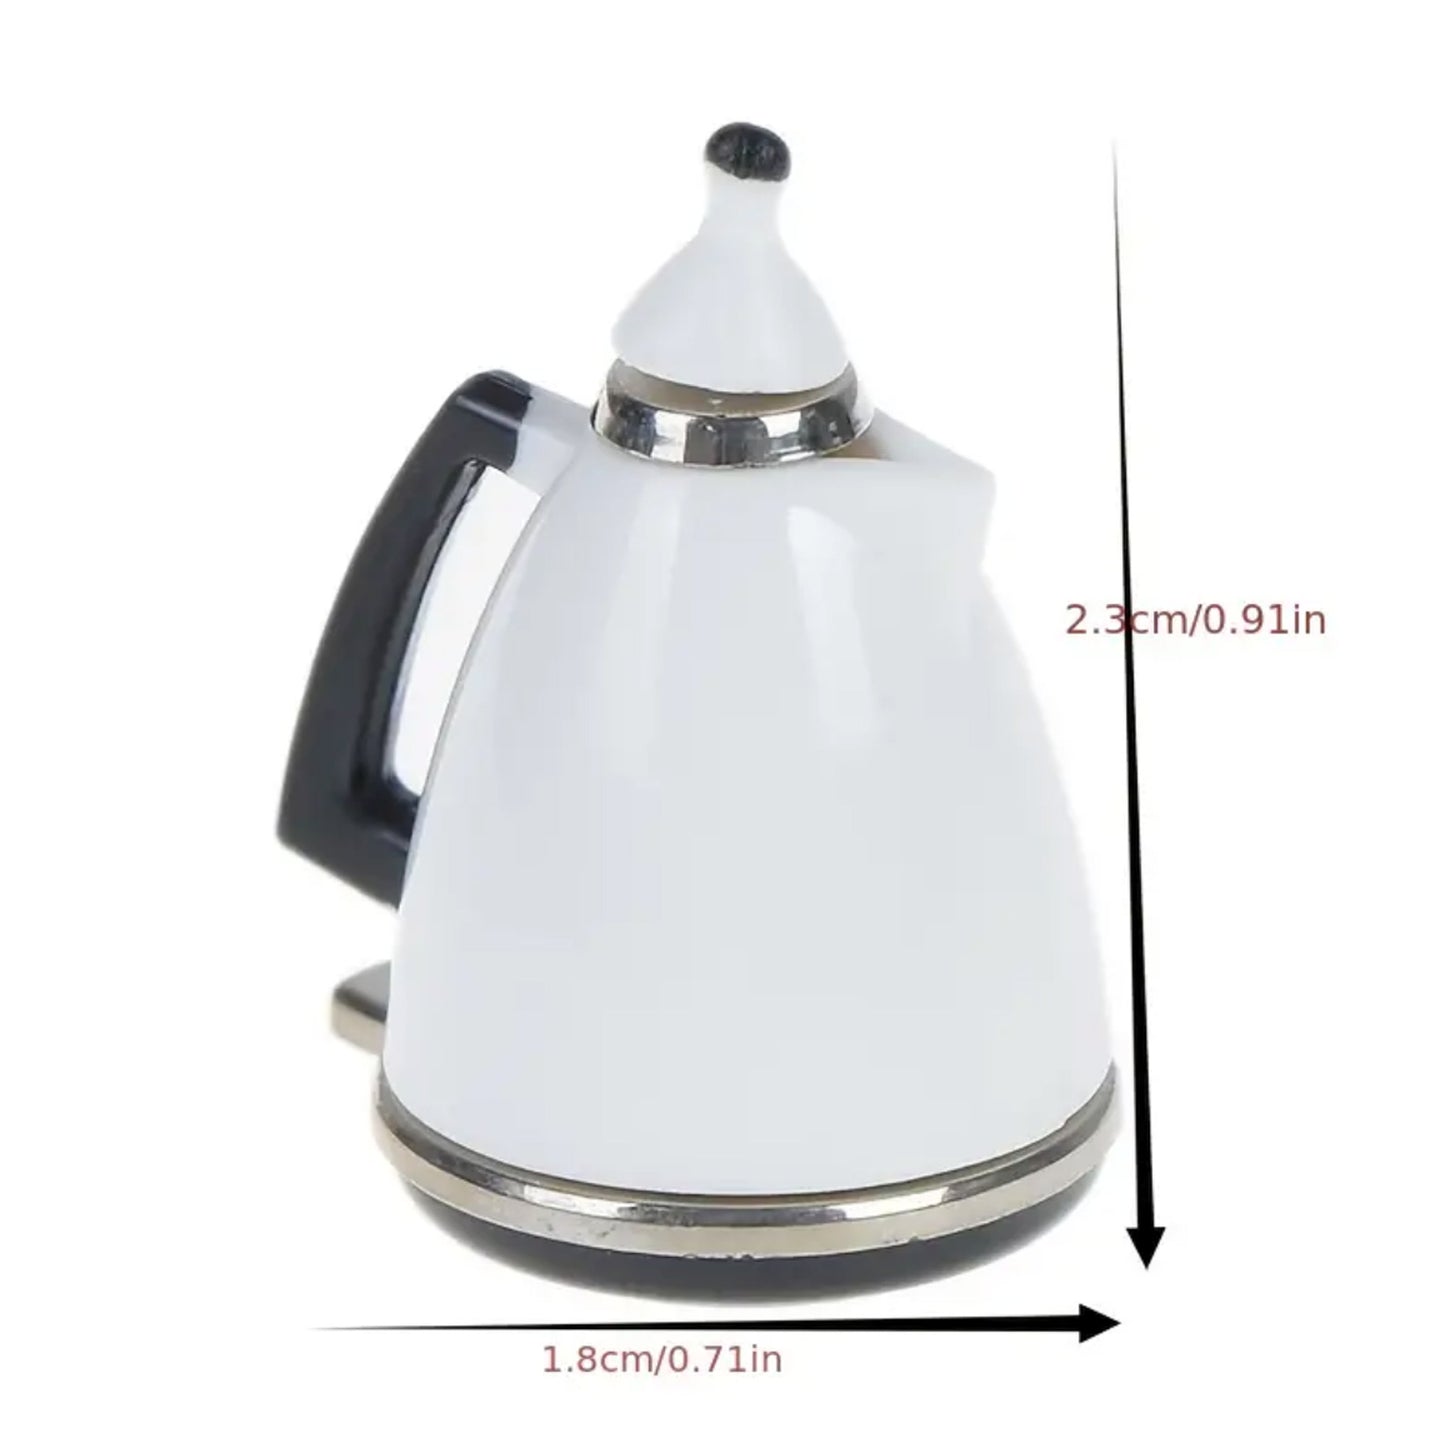     kettle-dimensions